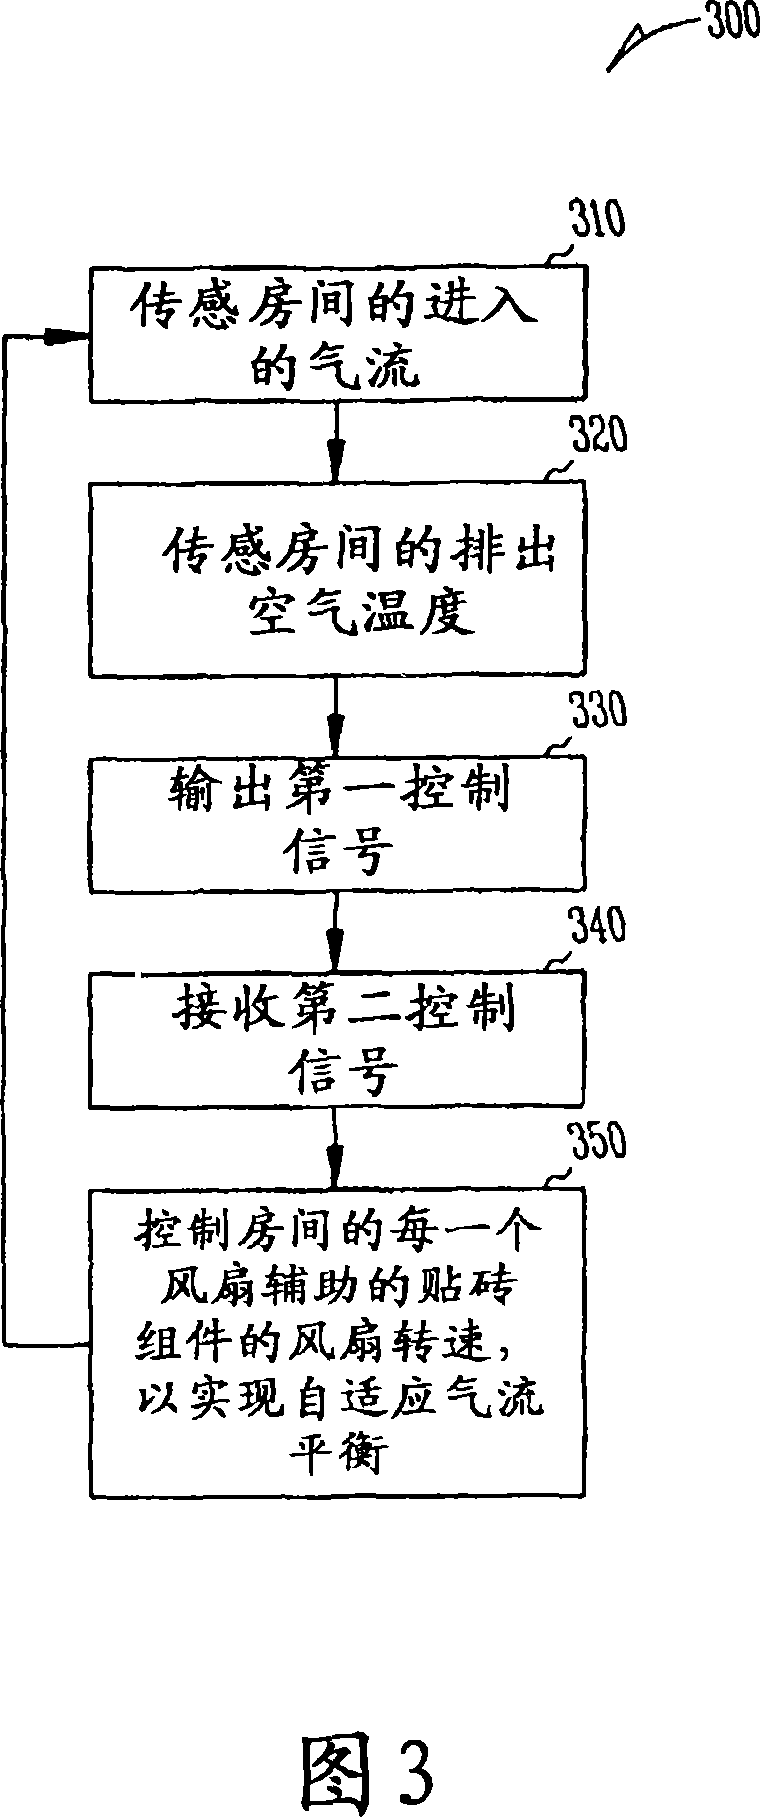 Auxiliary patch block of intelligent fan for executing self-adapting environmental management